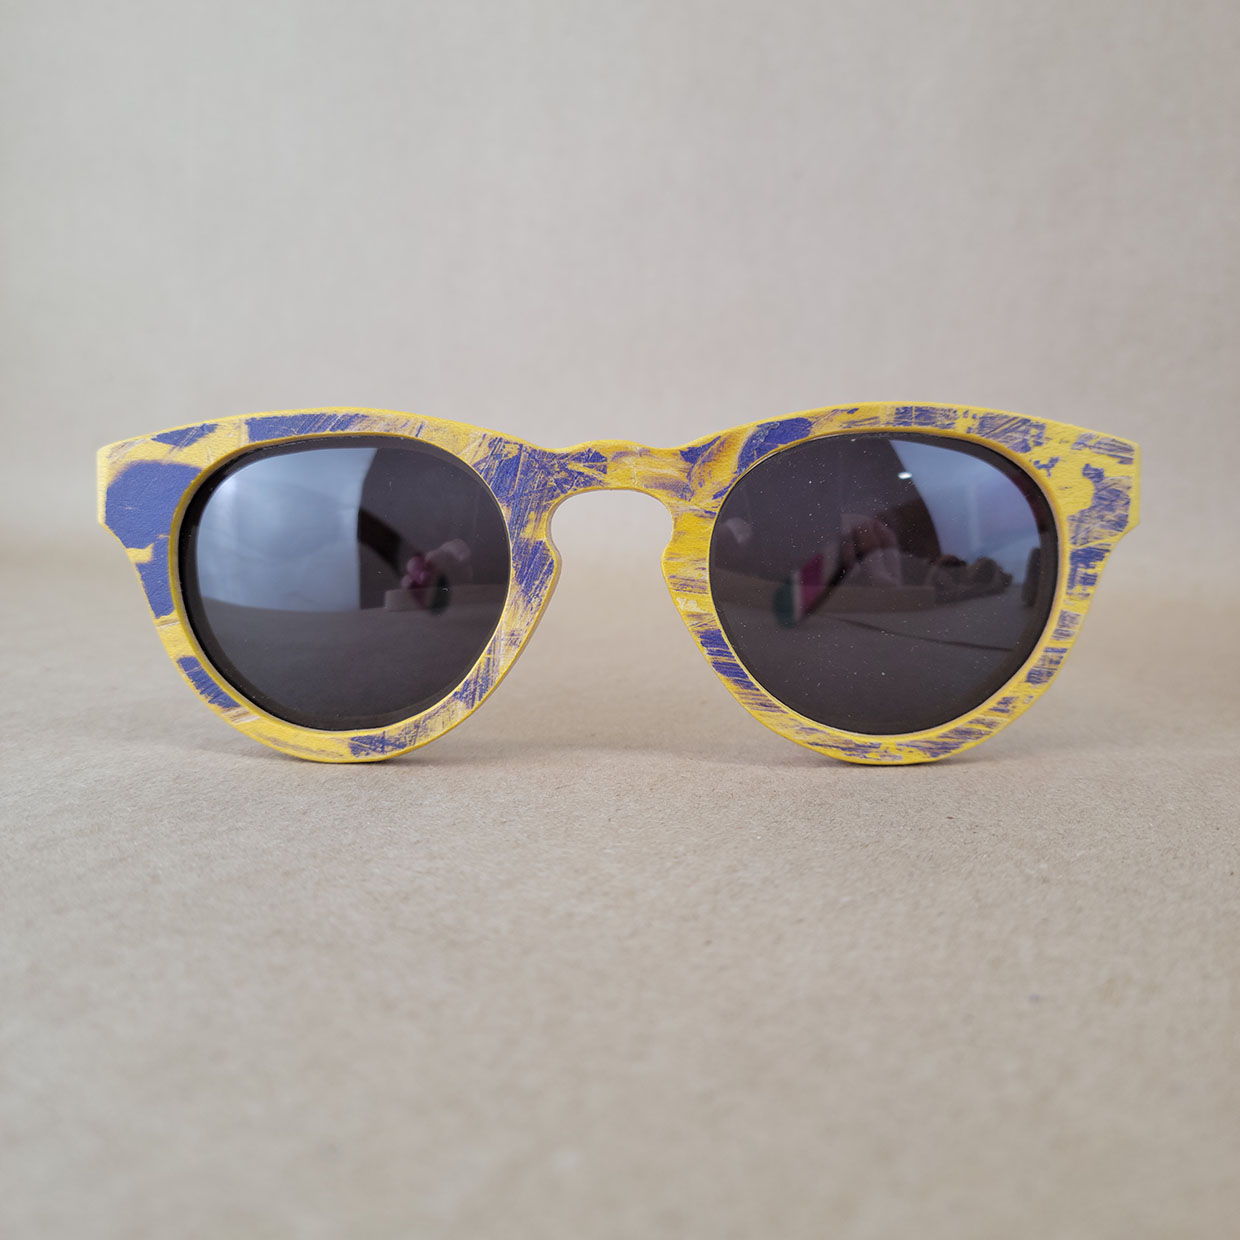 Recycled Wooden Skateboard Sunglasses (Rounded Lens Styles)